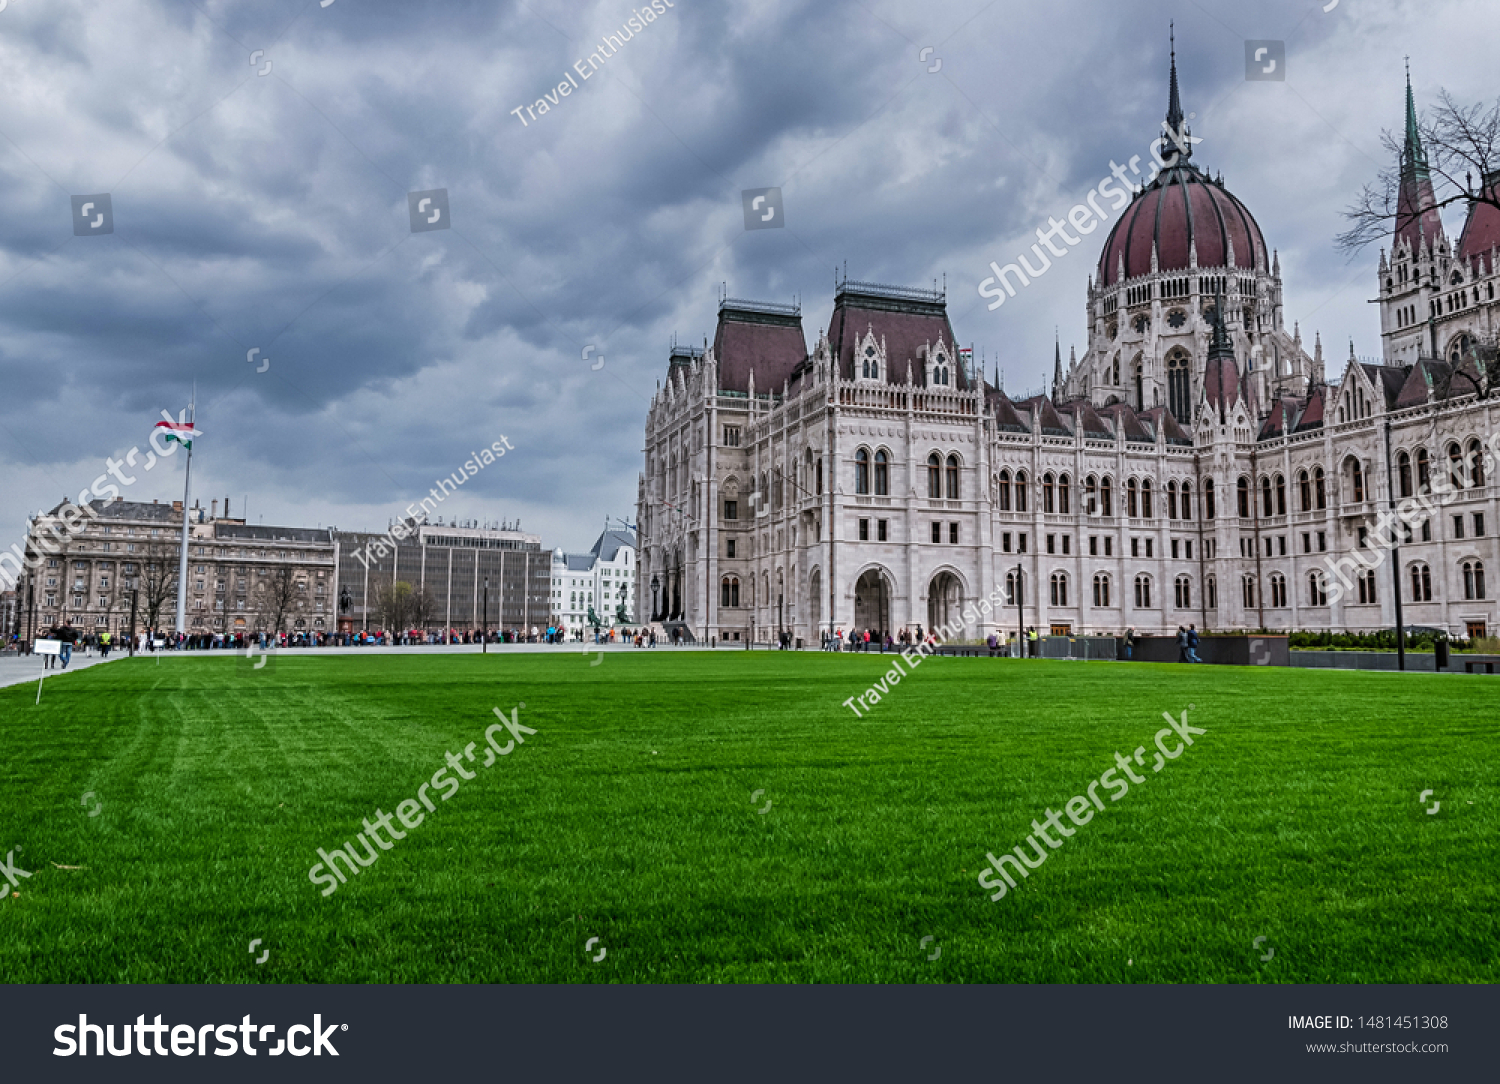 The Hungarian Parliament Building viewed from the grass covered Kossuth Square on a cloudy autumn afternoon #1481451308